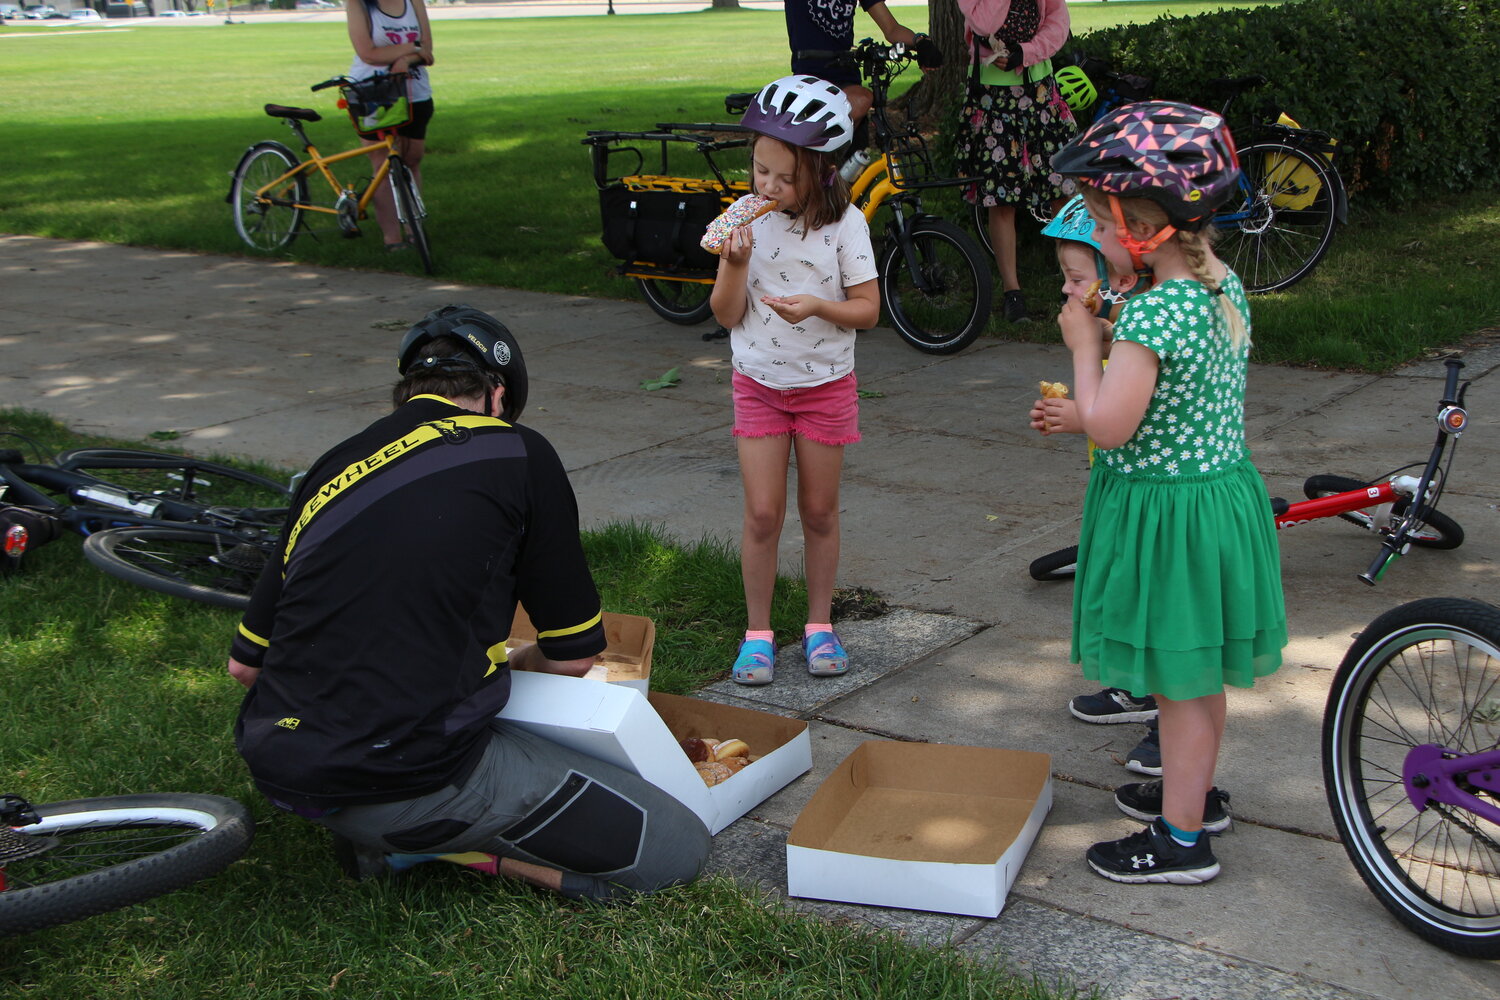 Mario Macaruso gives donuts to Joyful Riders Club outside of the Minnesota State Capitol on Saturday, June 17th for the DJ dance party ride.